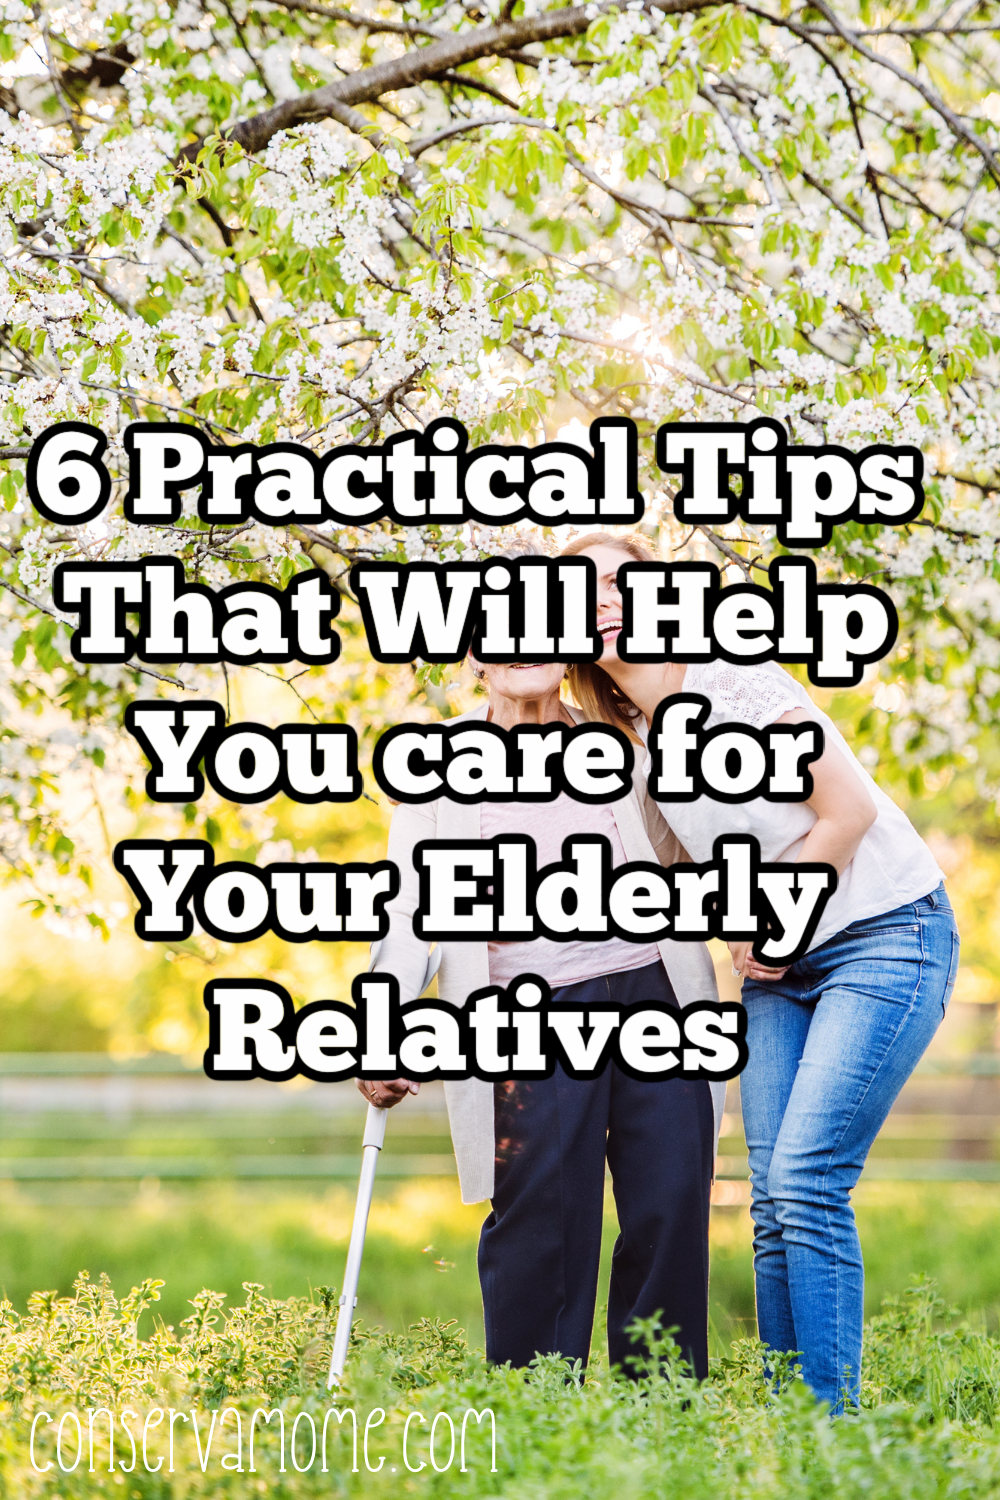 6 Practical Tips That Will Help You care for Your Elderly Relatives